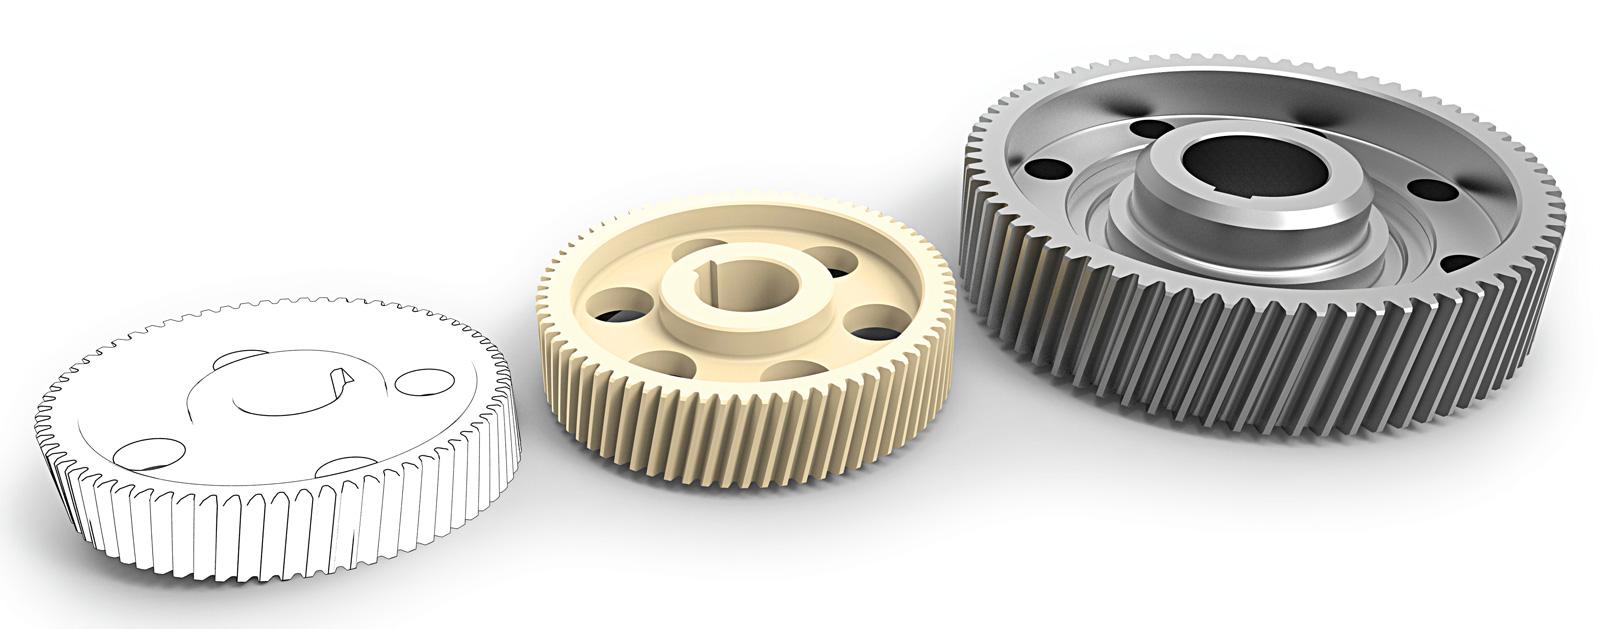 3D Printed Gears - DIYODE Magazine